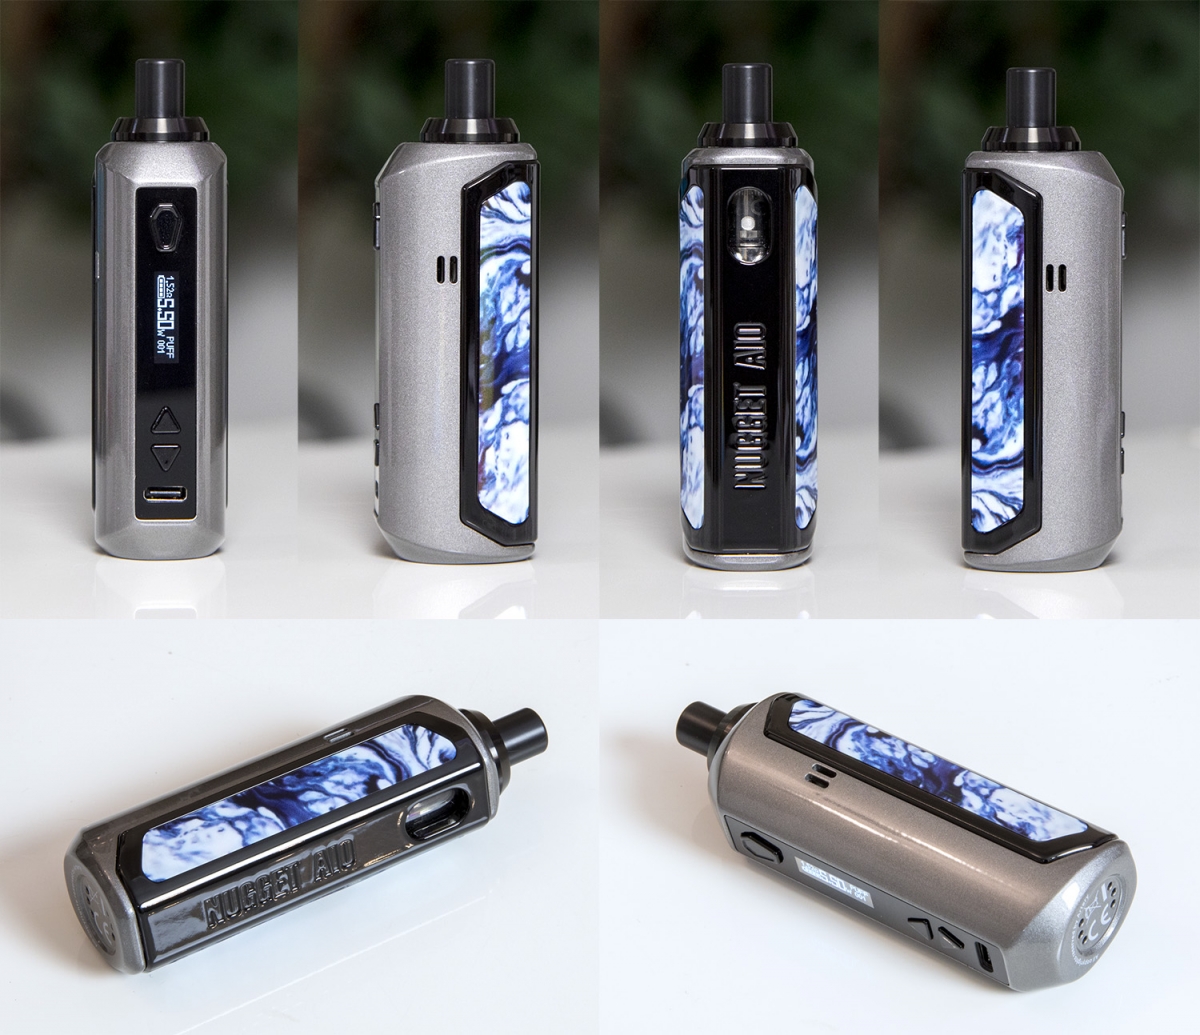 Artery Nugget AIO 40W Pod Kit from all angles